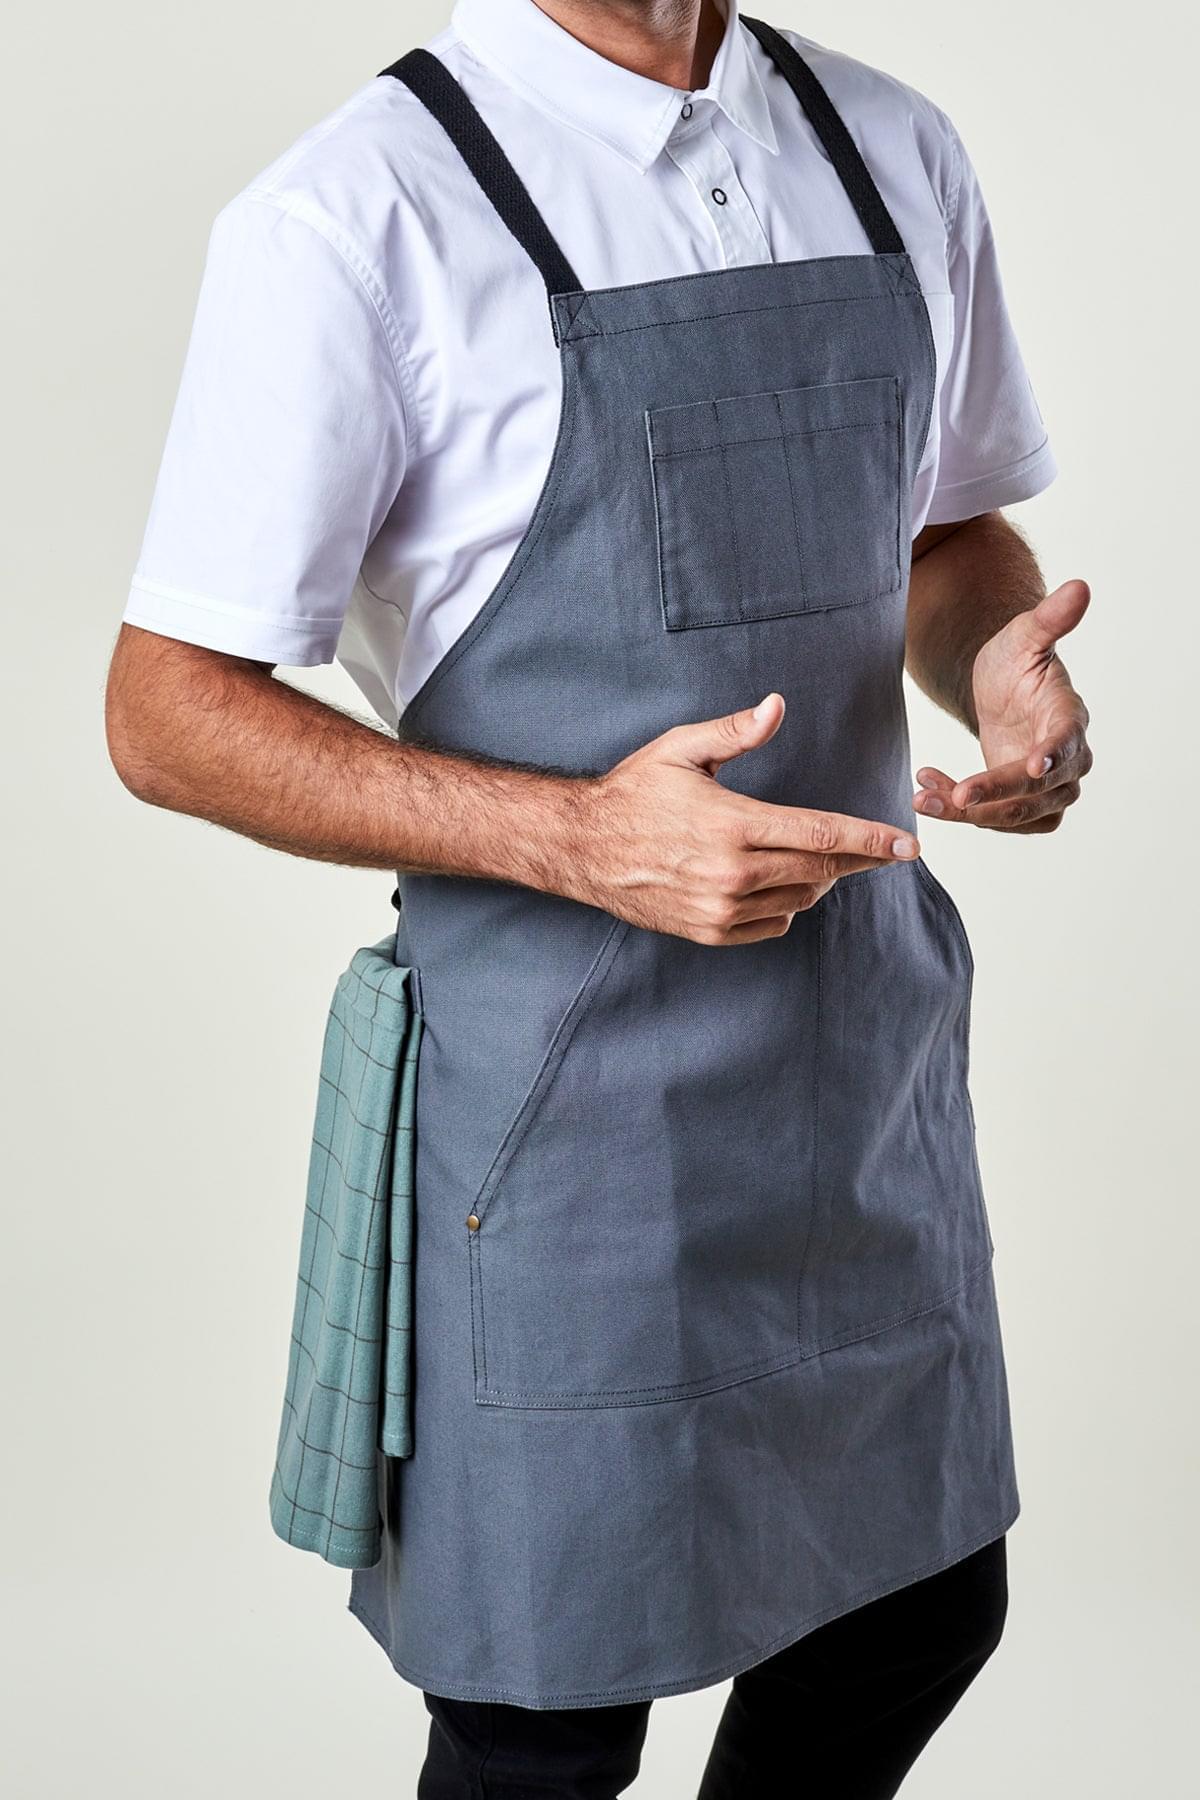 Image of person wearing Dover Cross Back Apron in Grey Canvas. | BlueCut Aprons